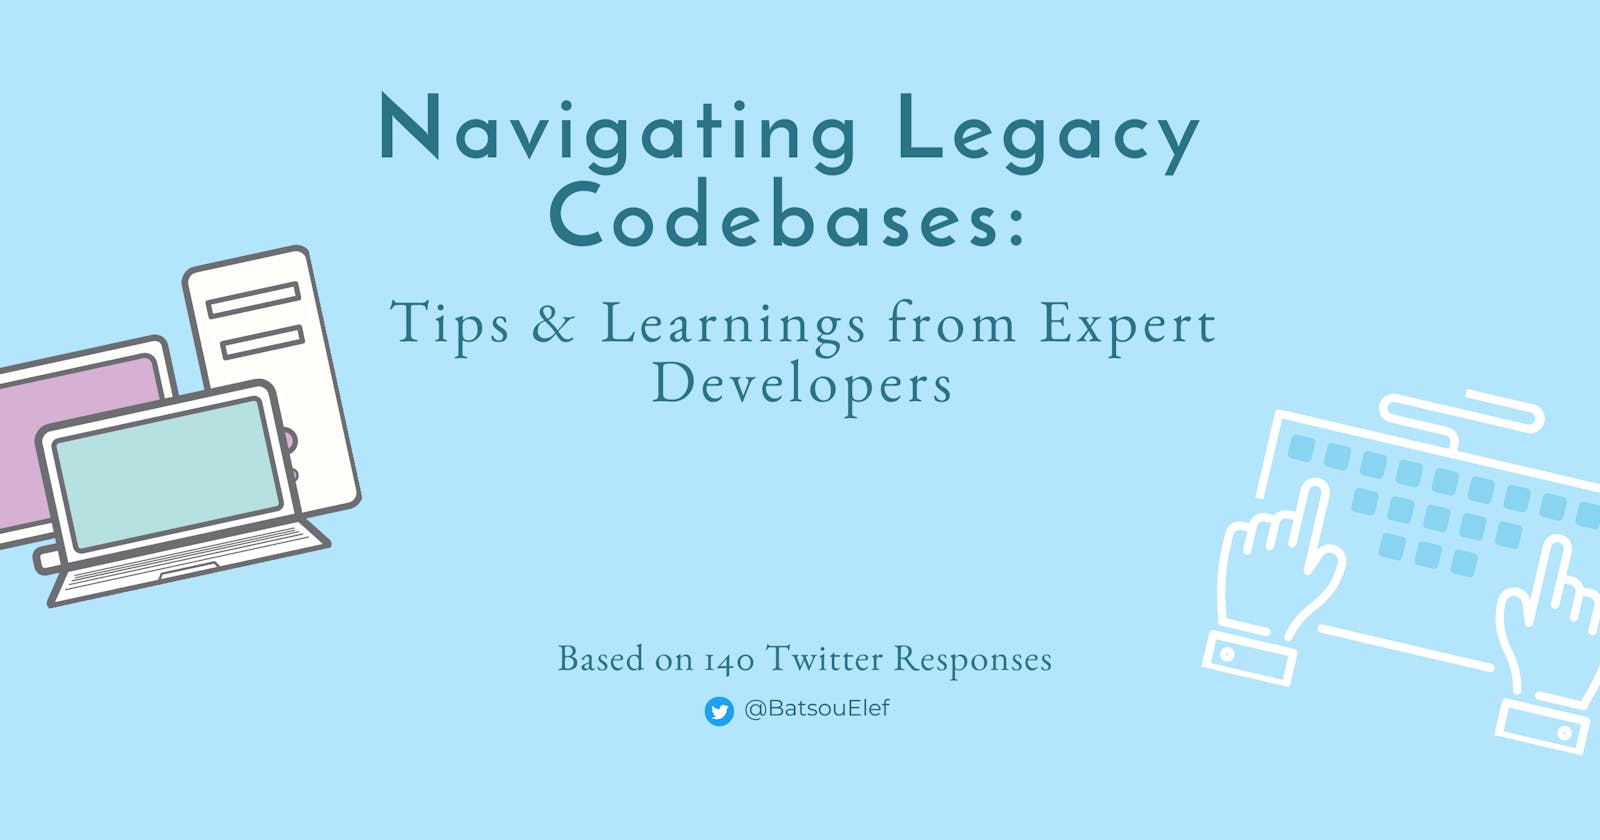 Navigating Legacy Codebases: Tips & Learnings from Expert Developers